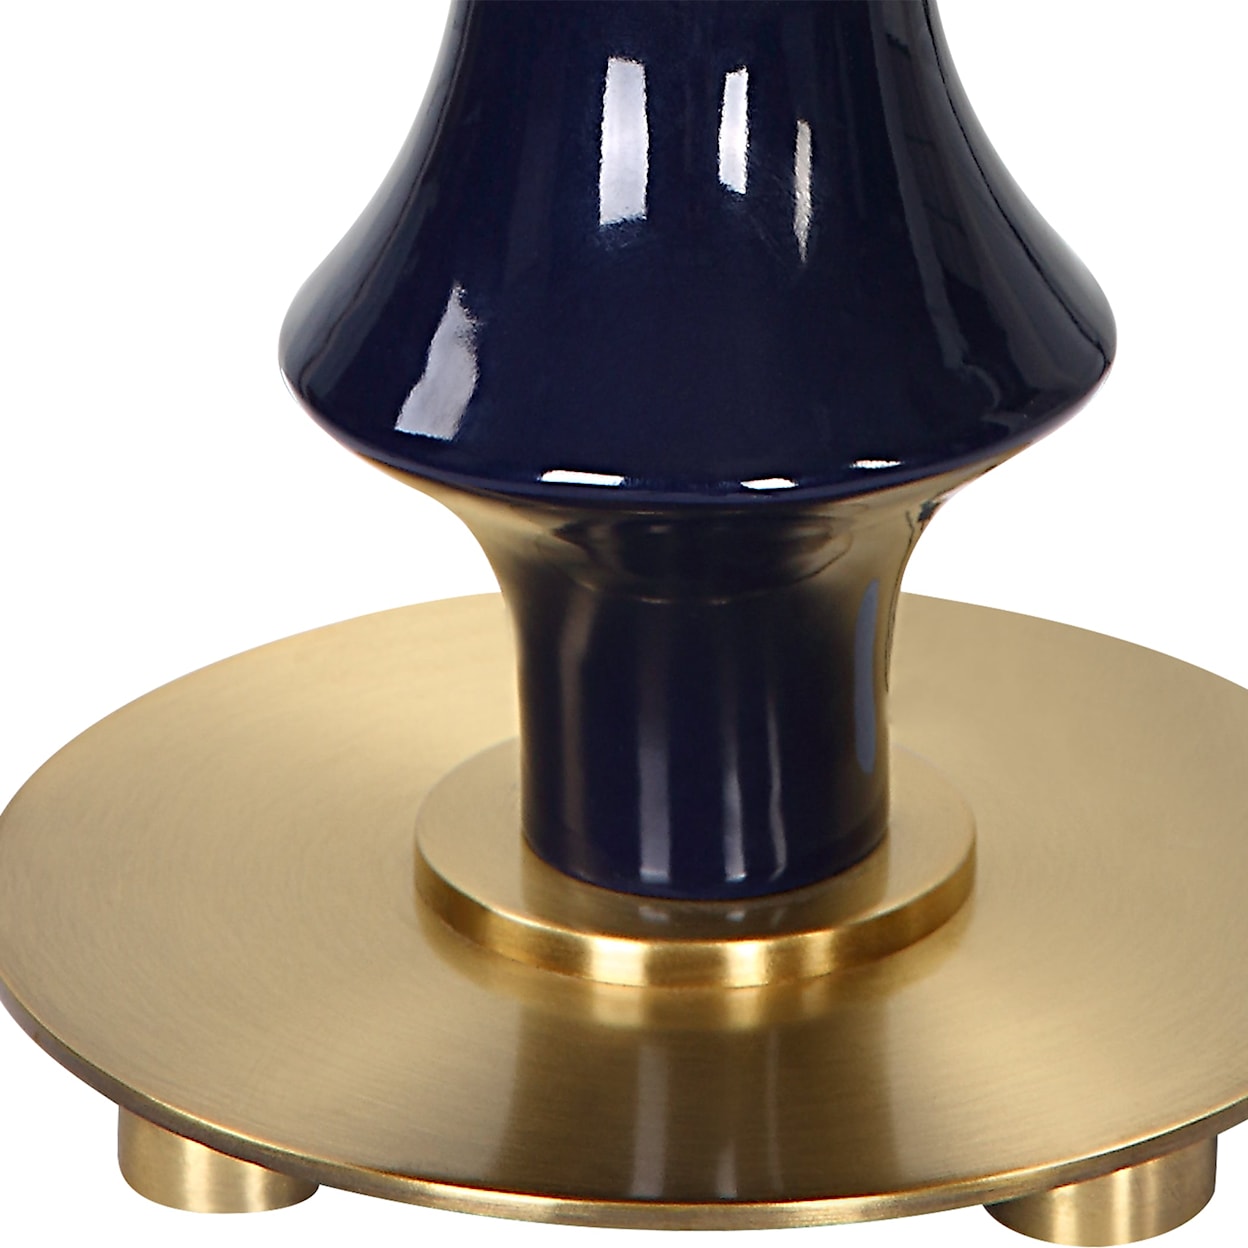 Uttermost Coil Sculpted Table Lamp